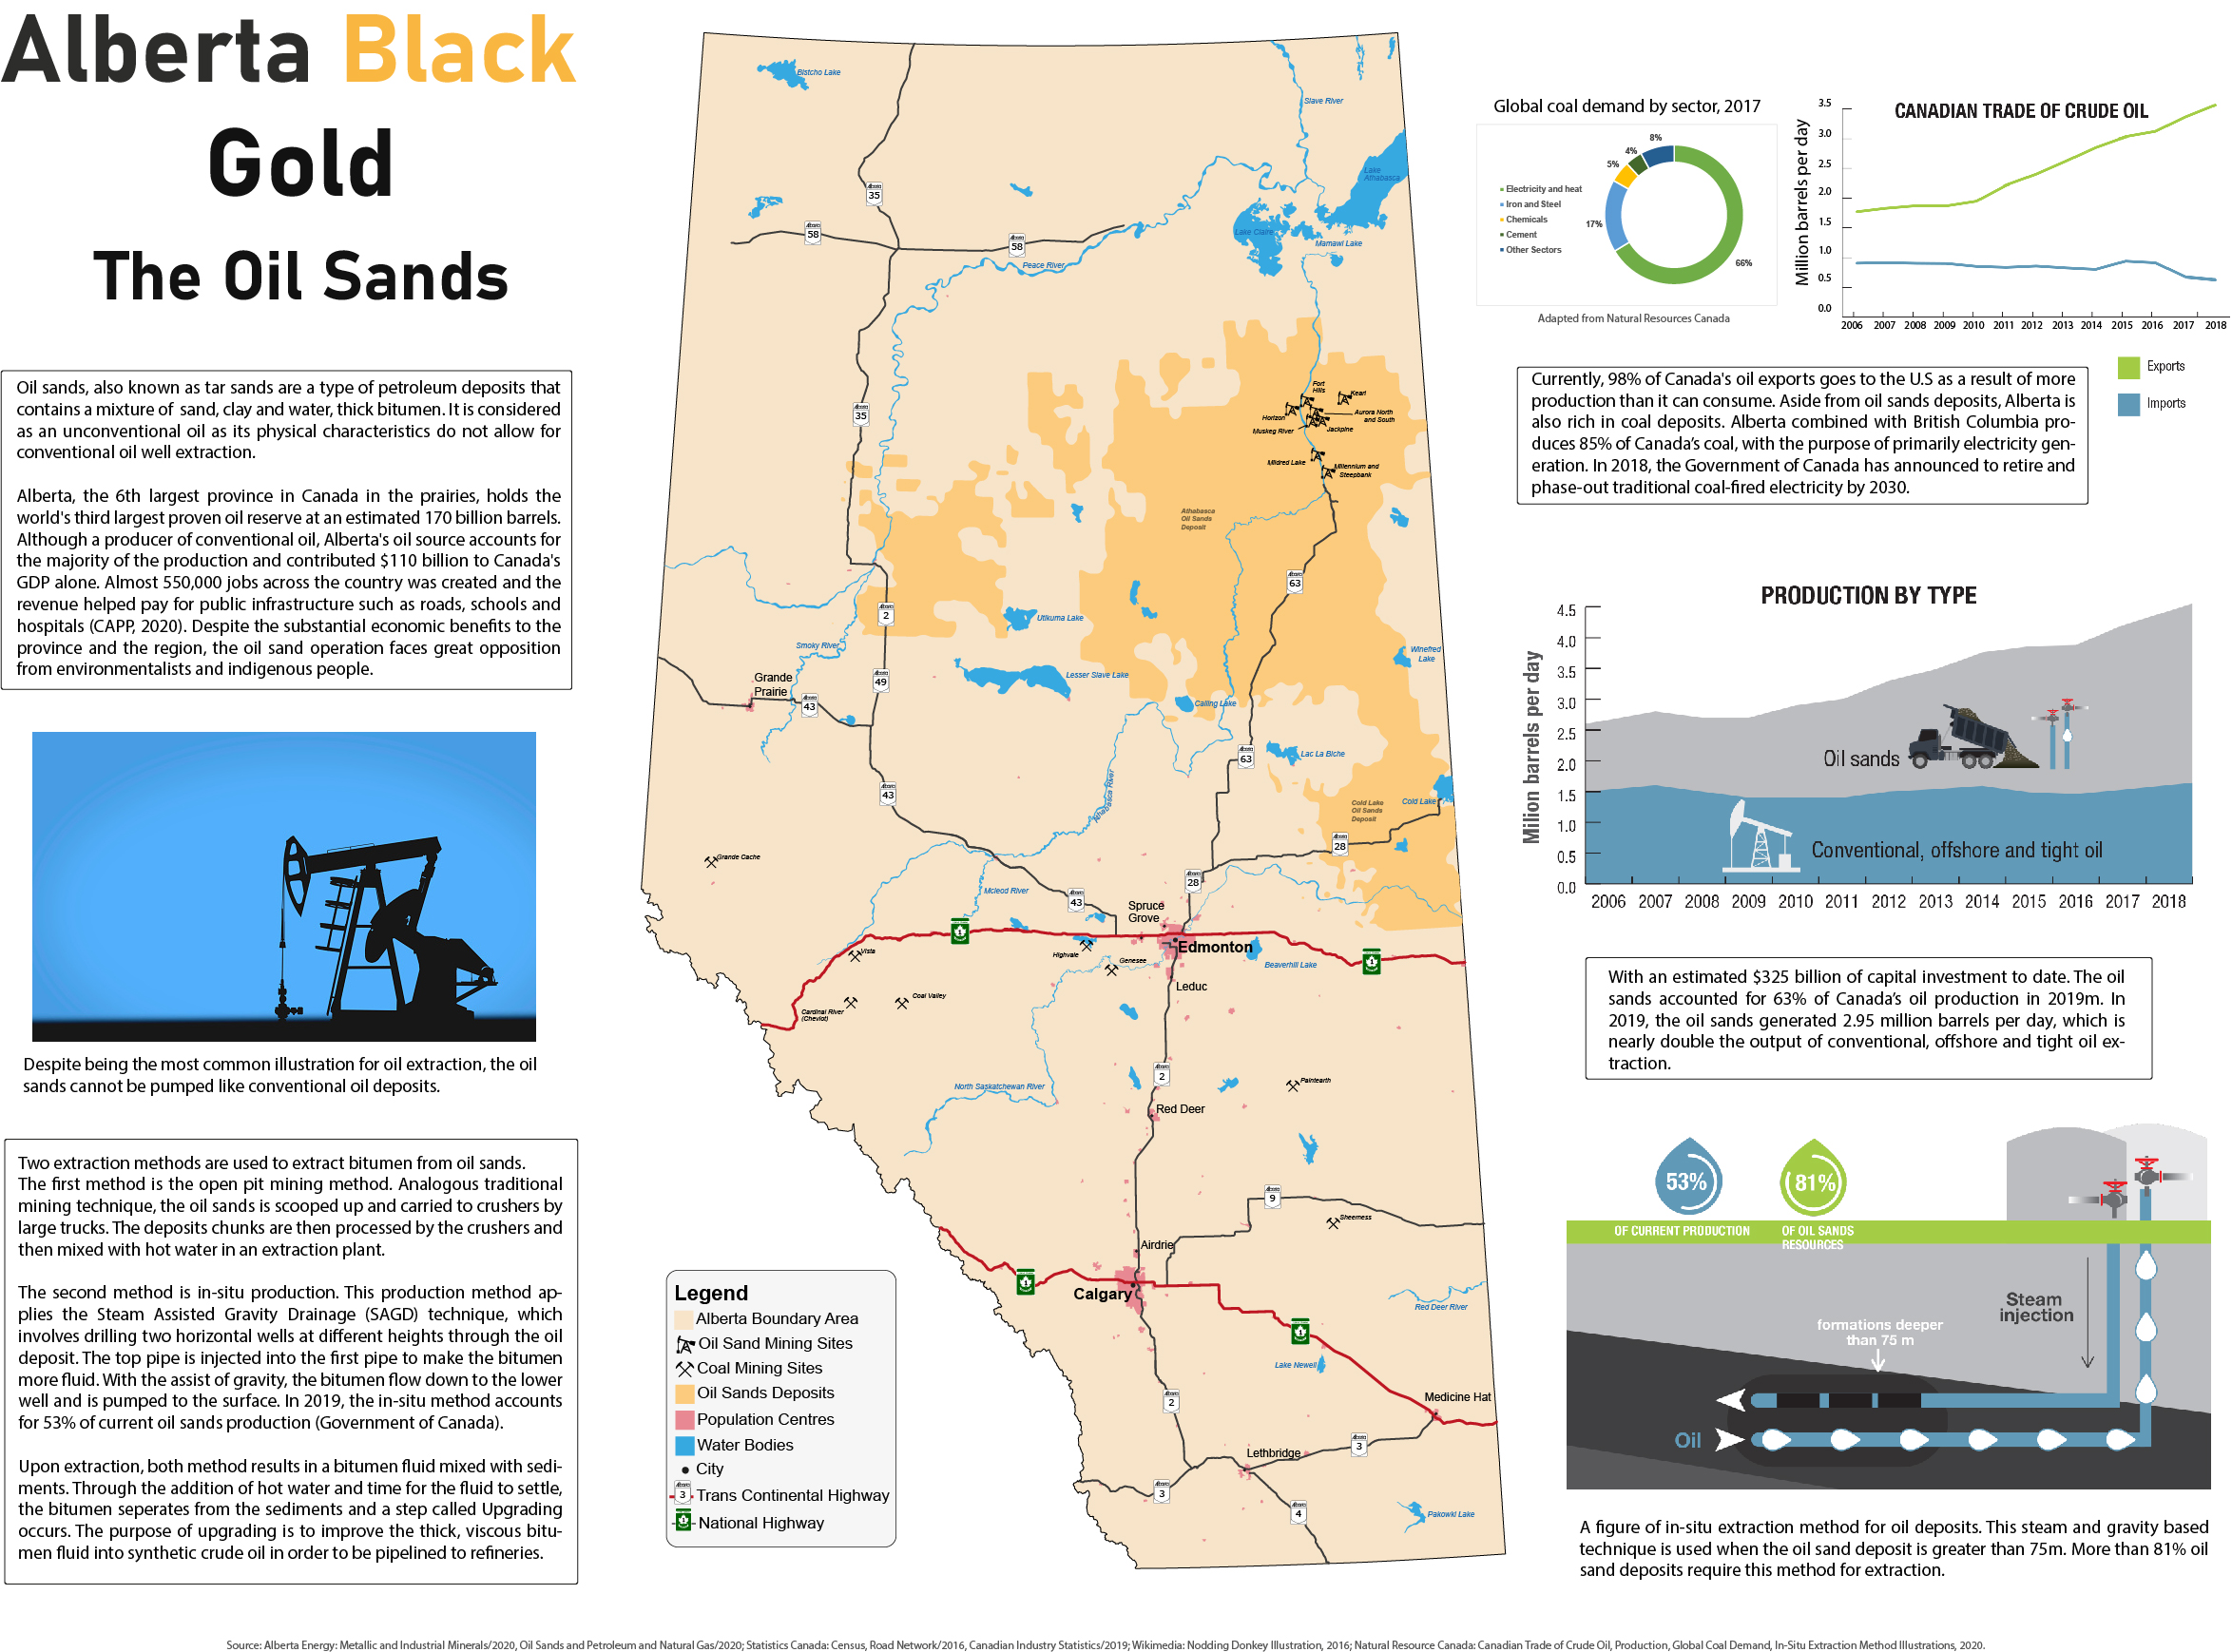 Alberta Black Gold, 2020: A map of Albertan Oil Sands and Coal Areas. Mixed Media: ArcGIS Pro 2.5, Avenza MAPublisher 10.6, Adobe Illustrator 2020.